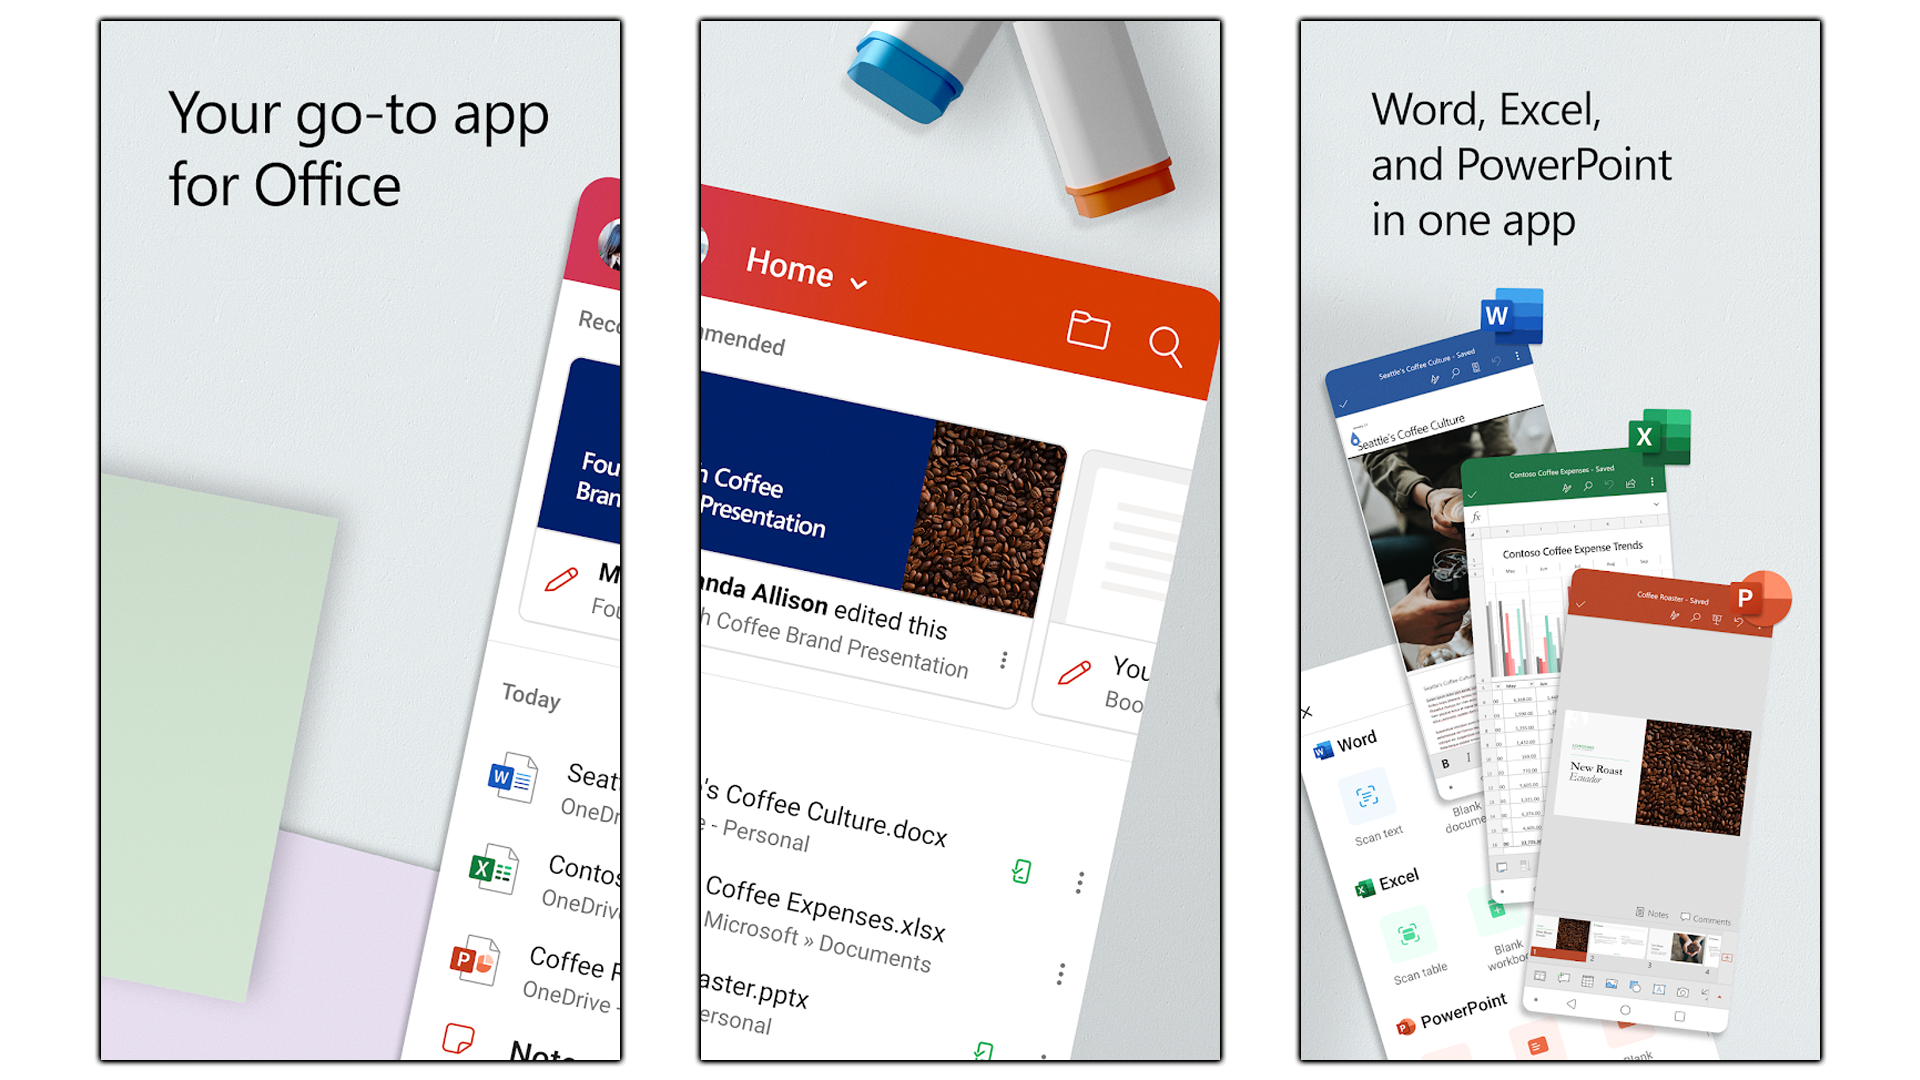 Screenshots of the Office Android app.